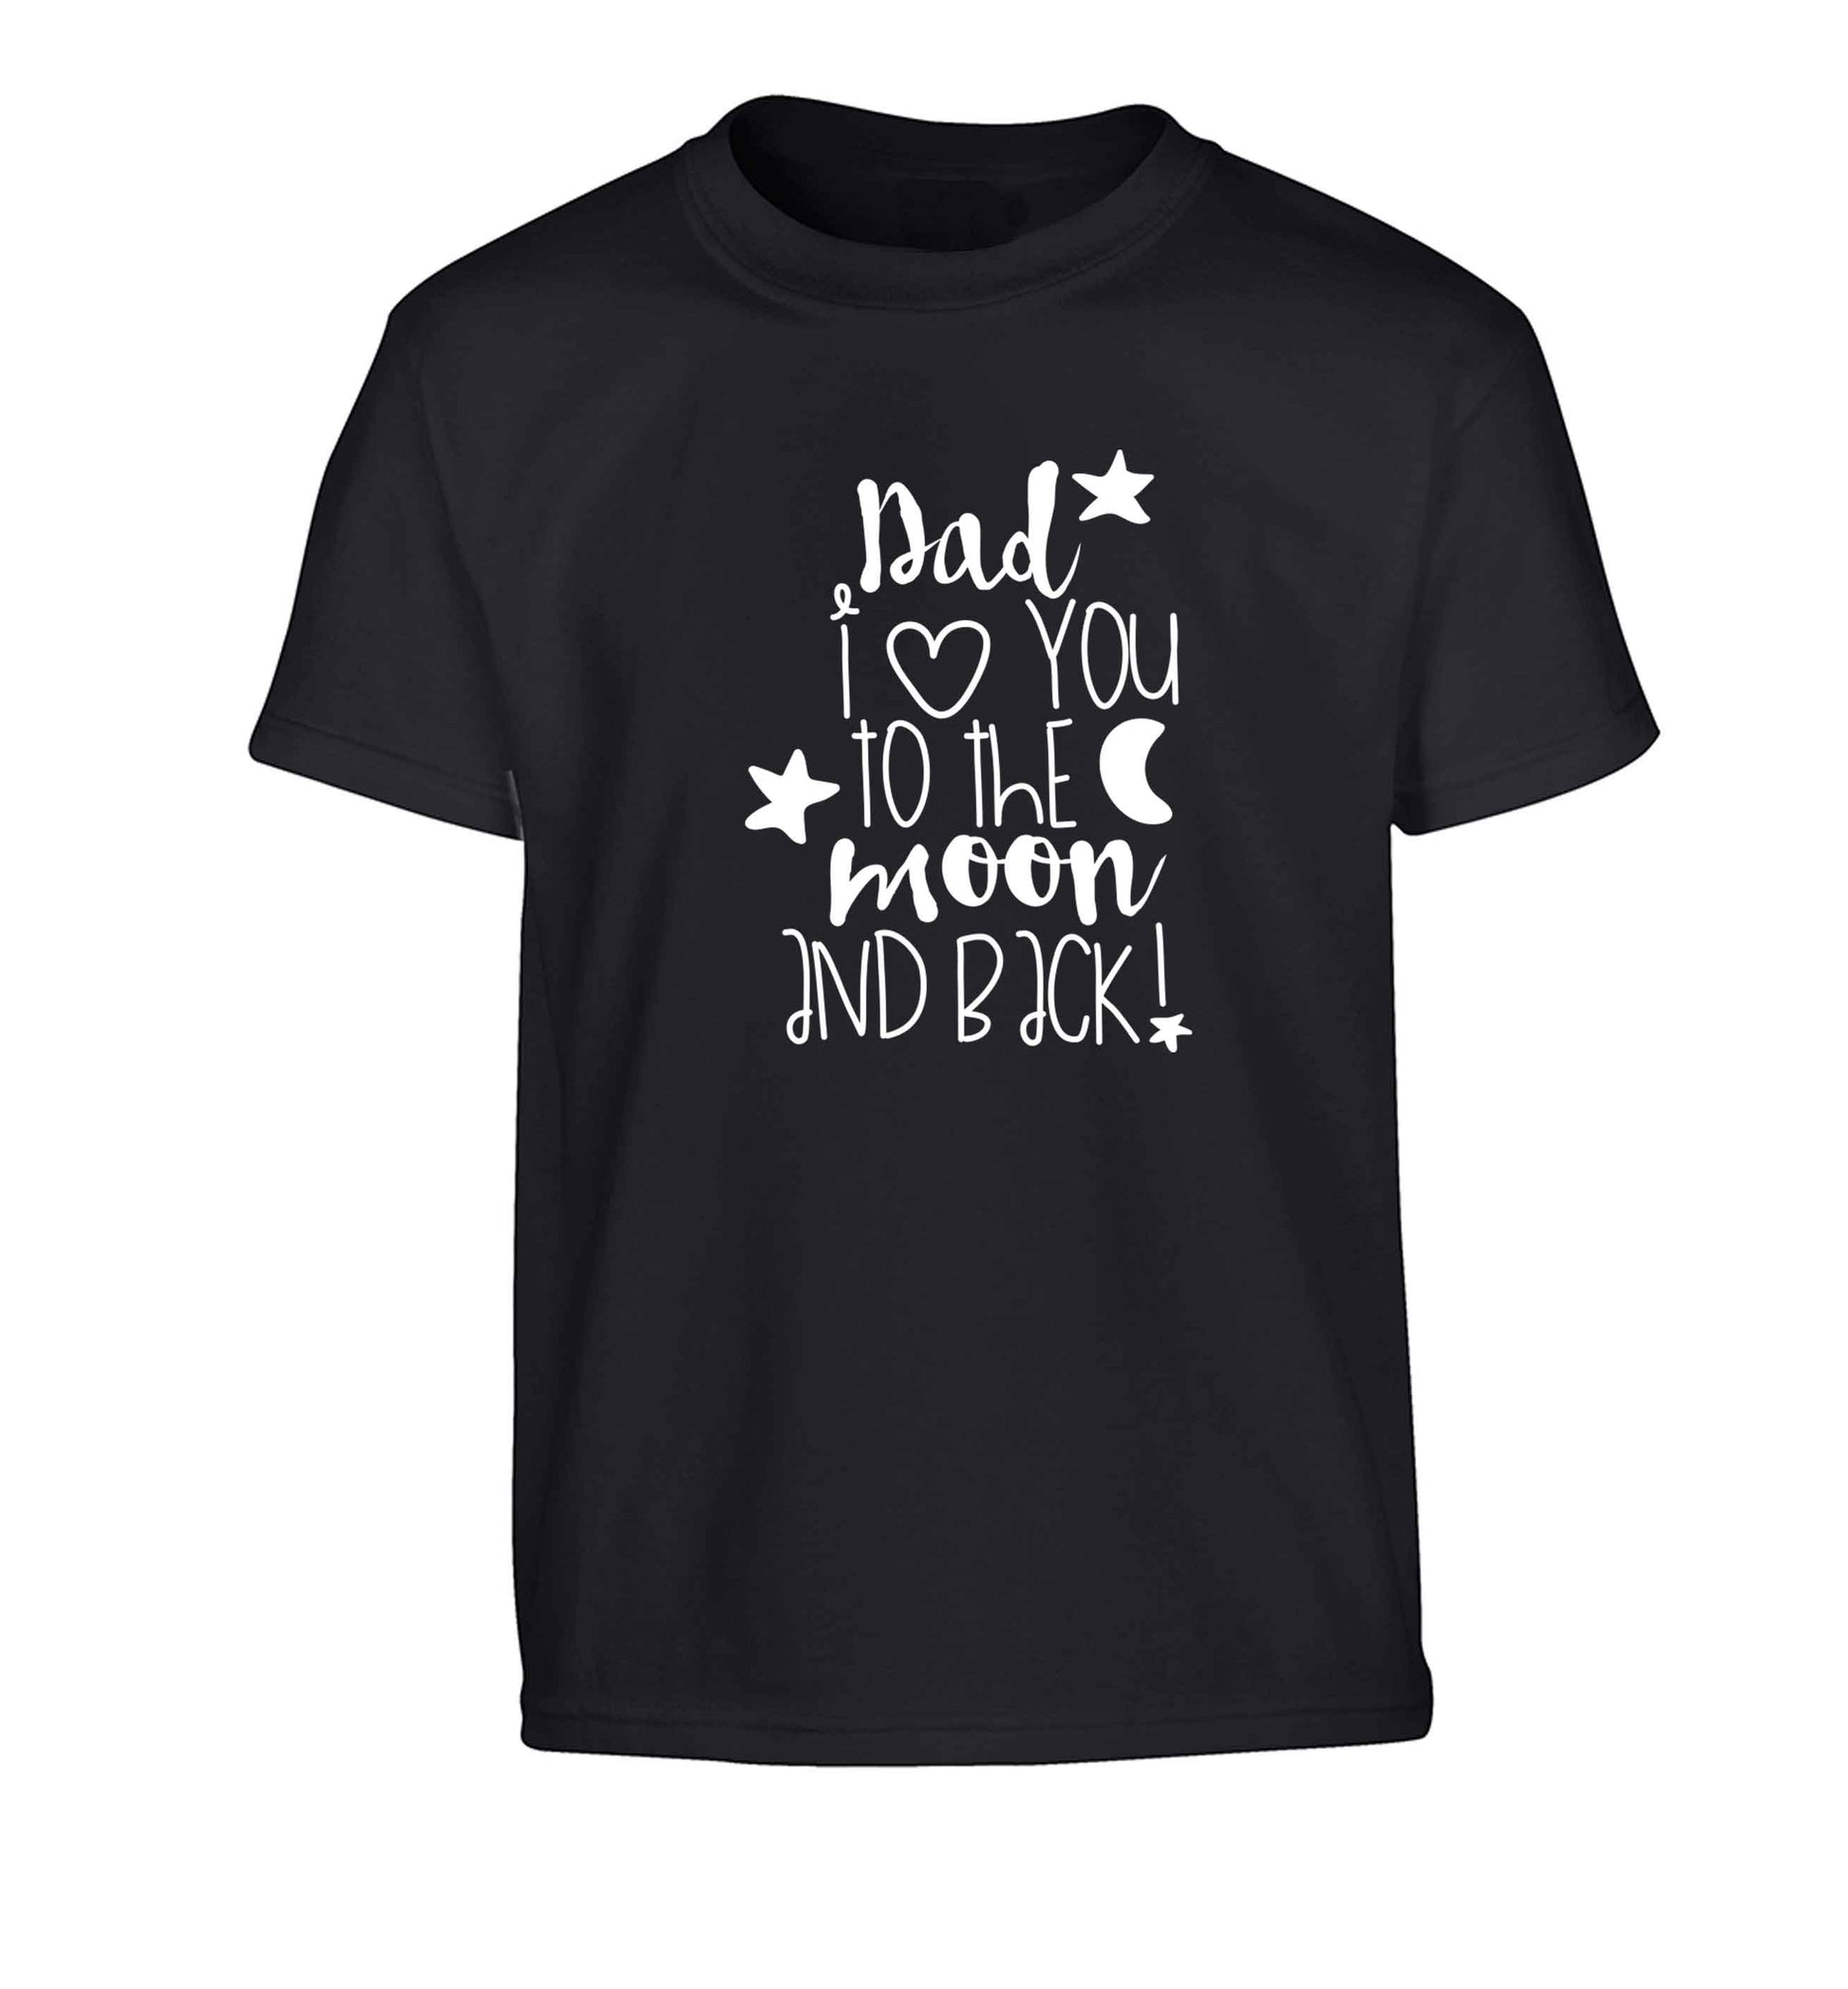 Dad I love you to the moon and back Children's black Tshirt 12-13 Years